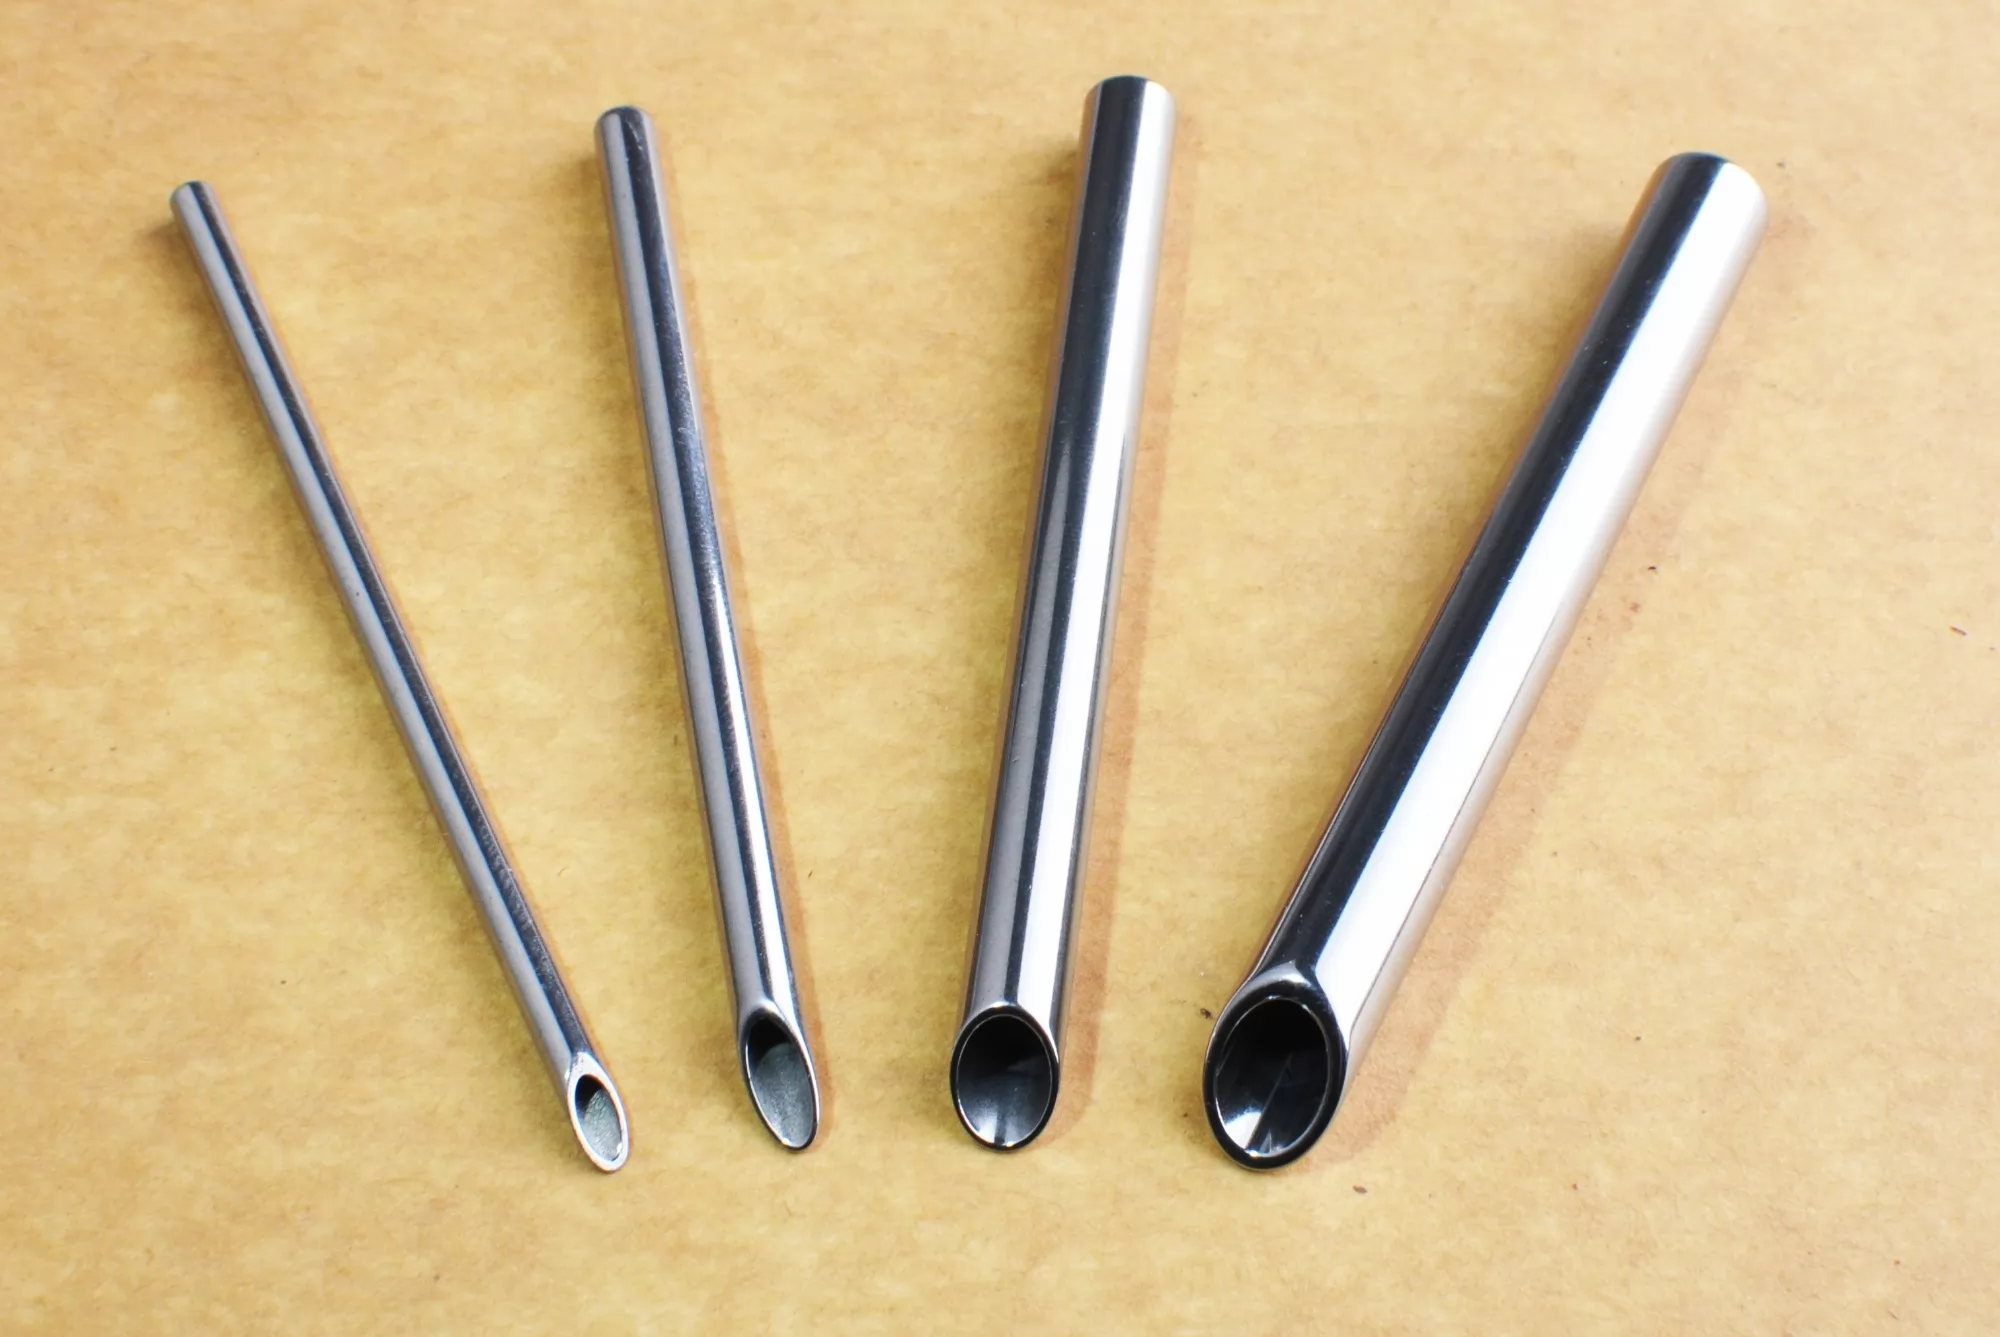 316l Stainless Steel Length: 90 degree angled ends 3MM and 4MM Receive needle --PT101